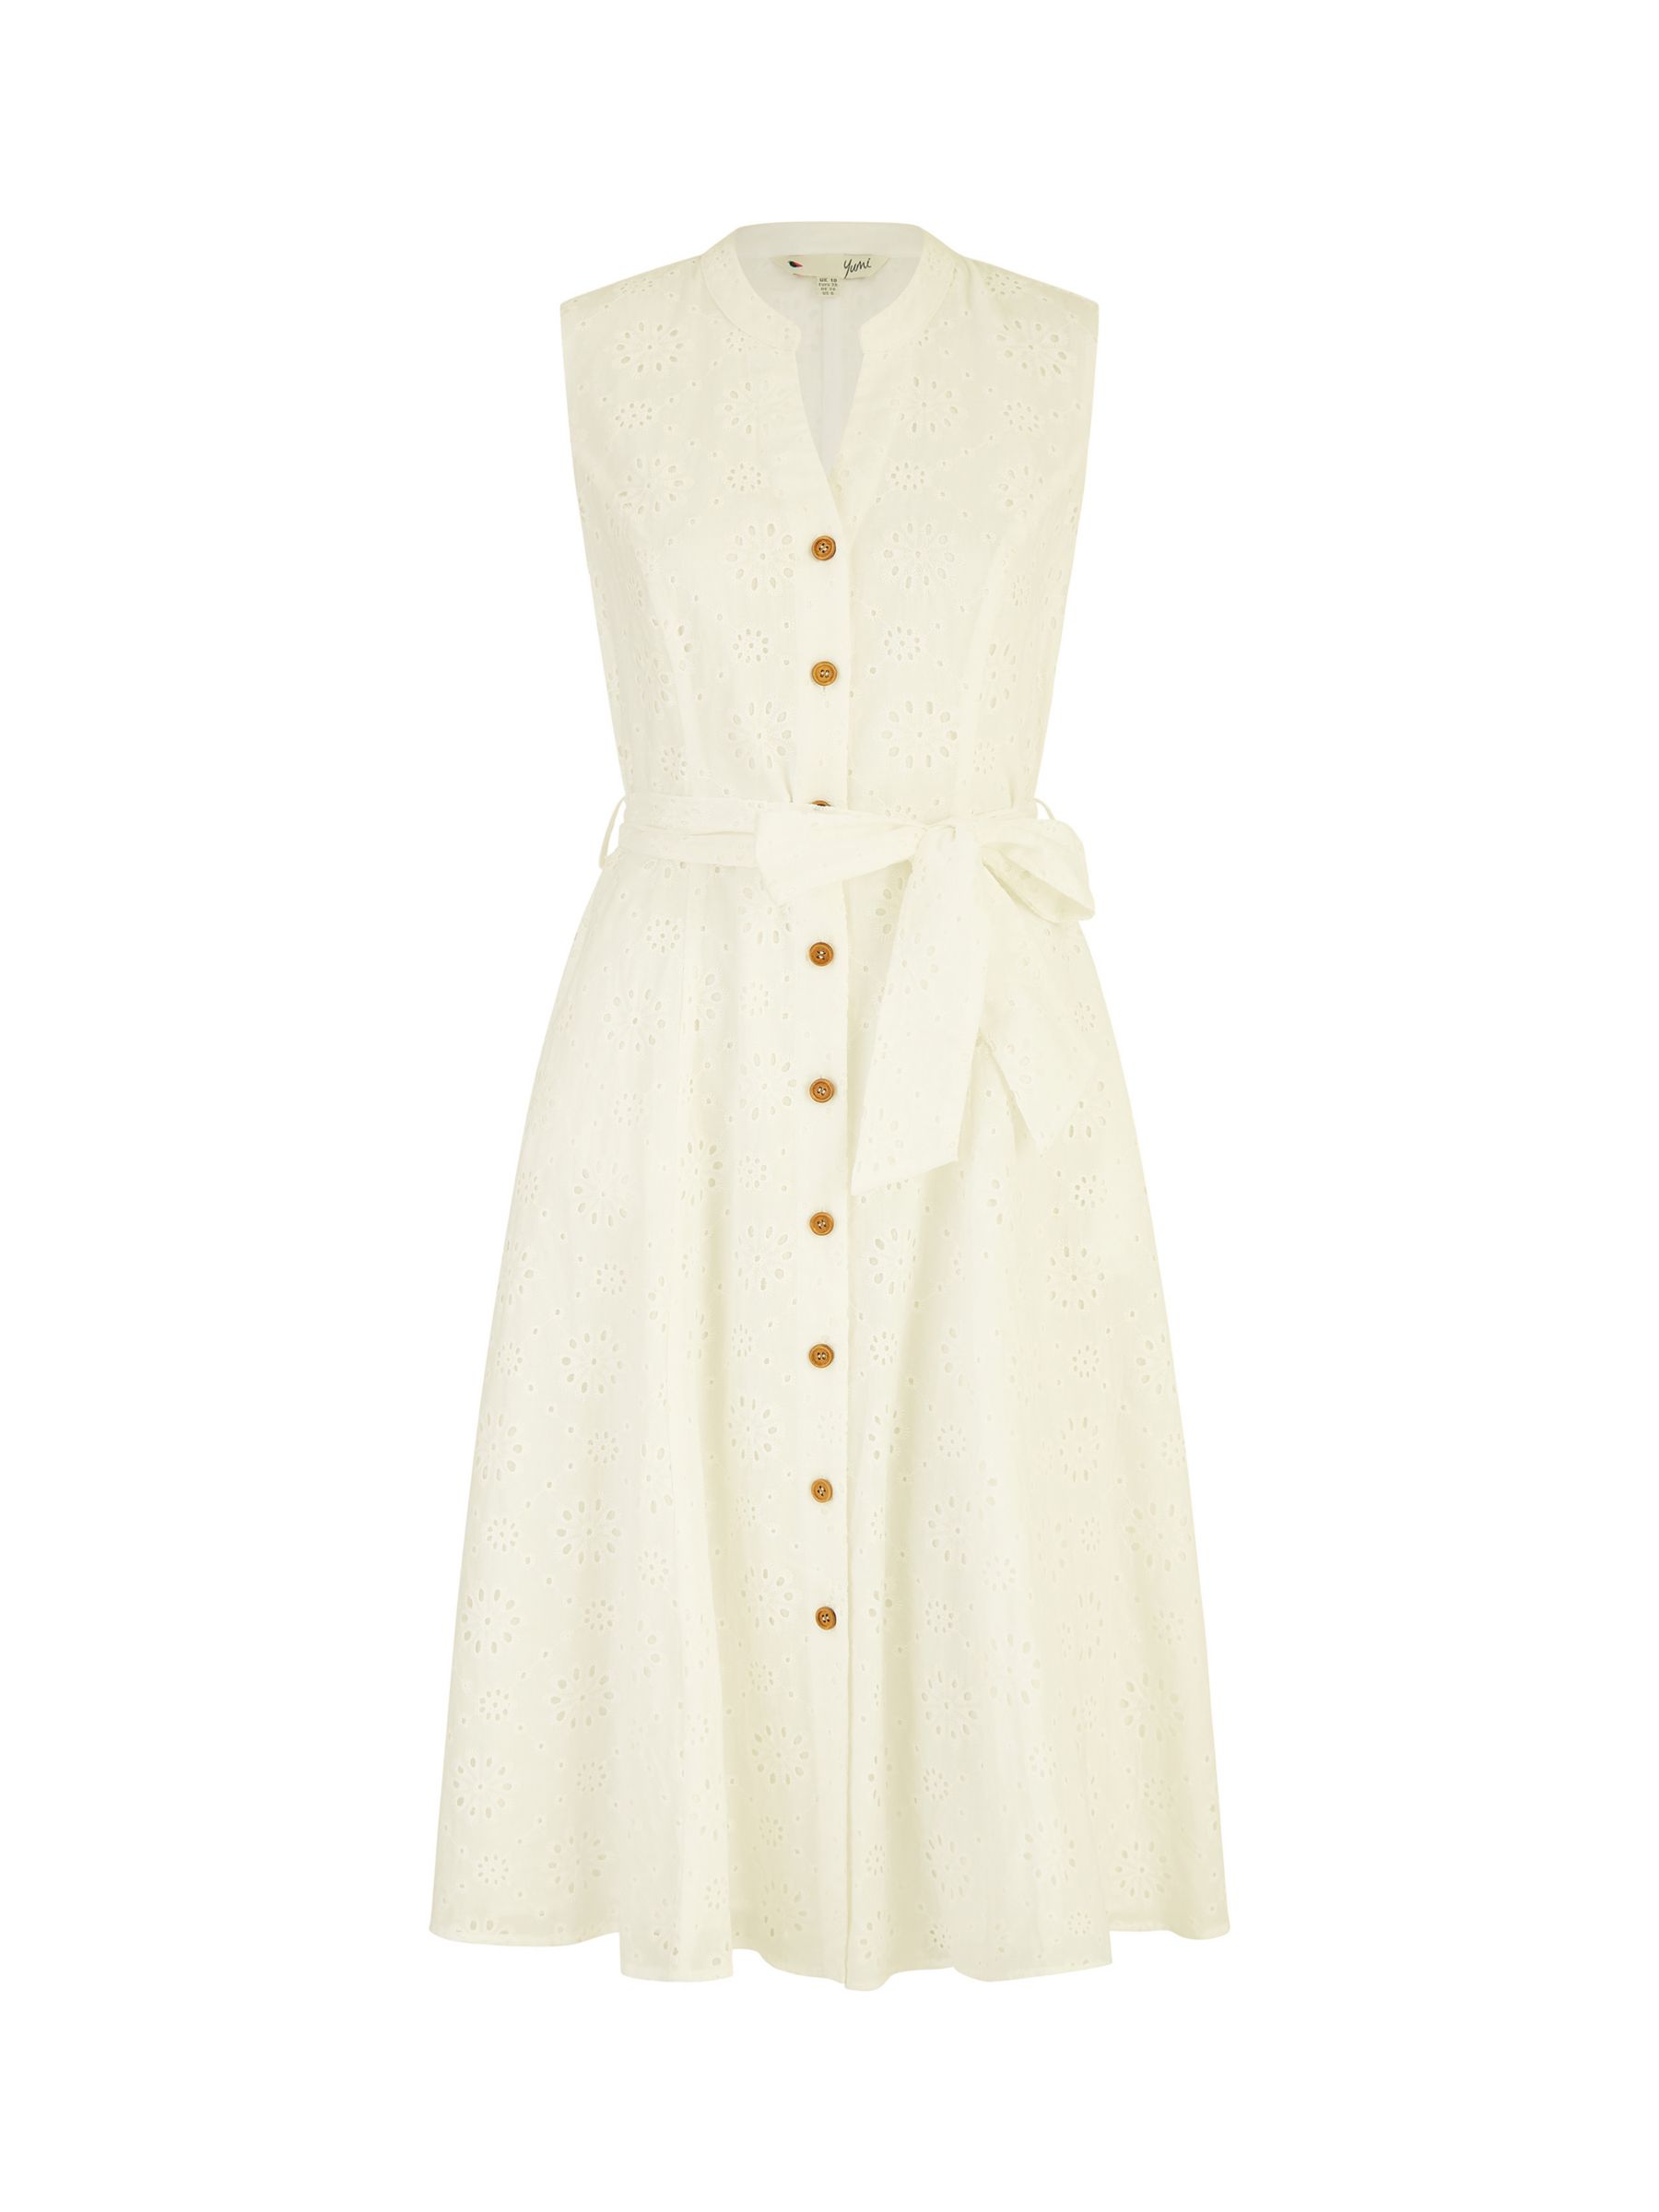 Buy Yumi Flower Broderie Anglaise Midi Cotton Dress, White Online at johnlewis.com